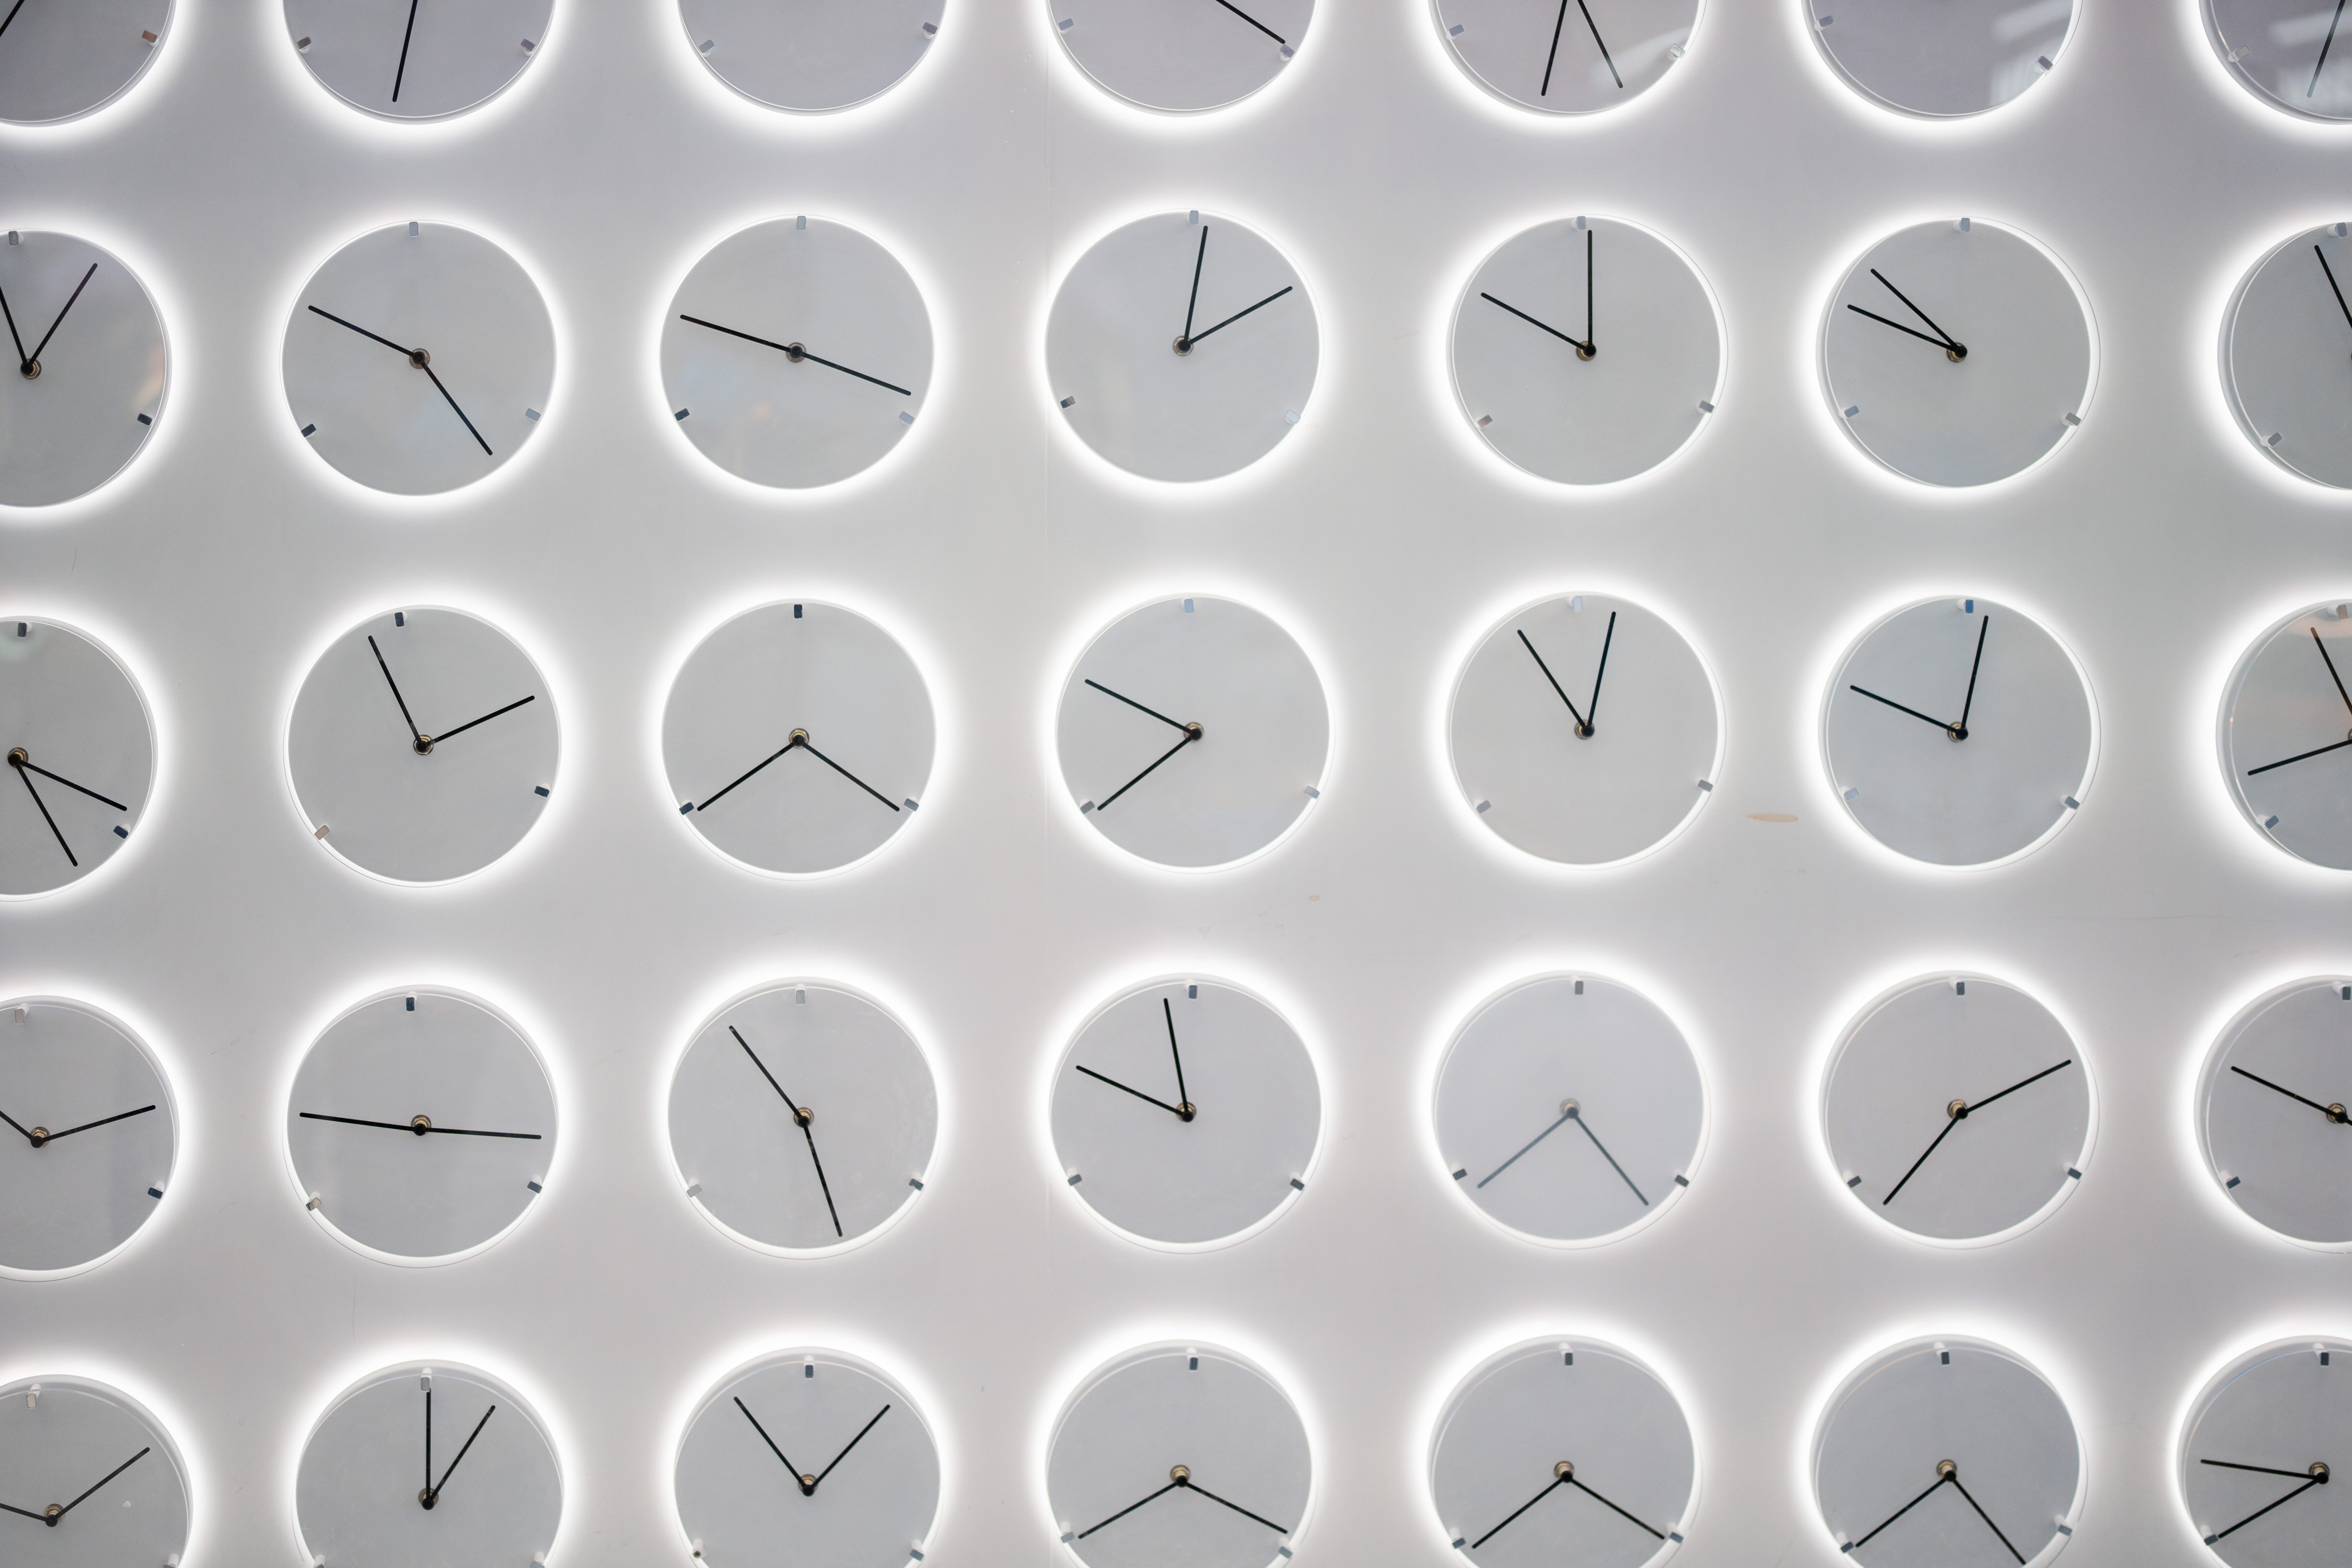 Several clocks with different times shown on each on a white background